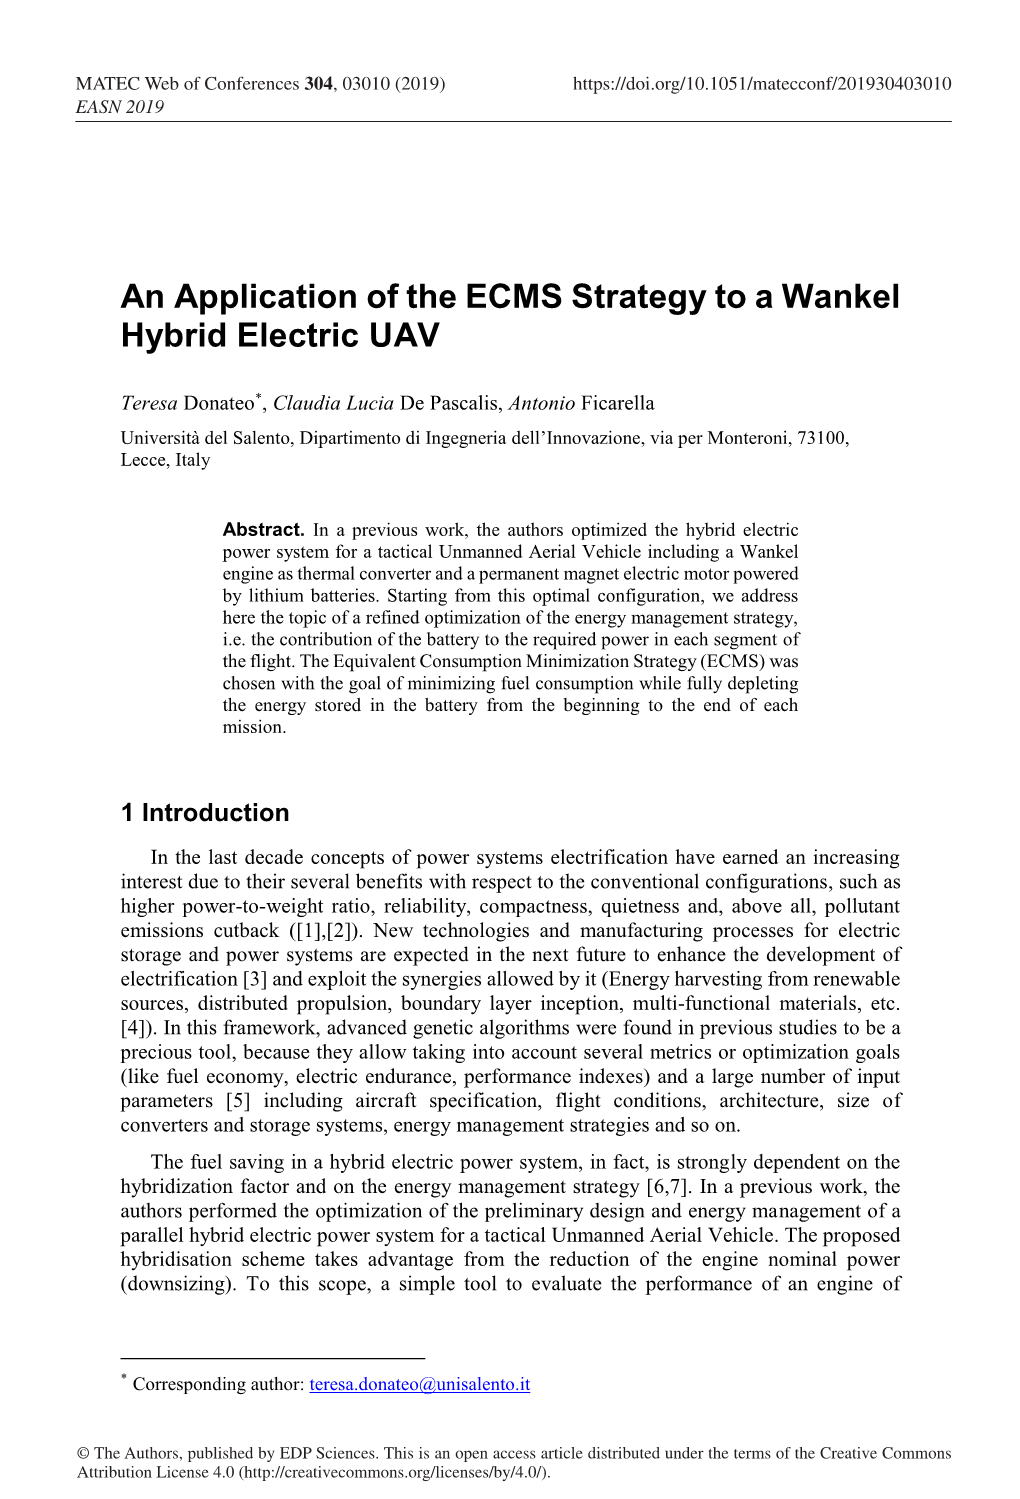 An Application of the ECMS Strategy to a Wankel Hybrid Electric UAV